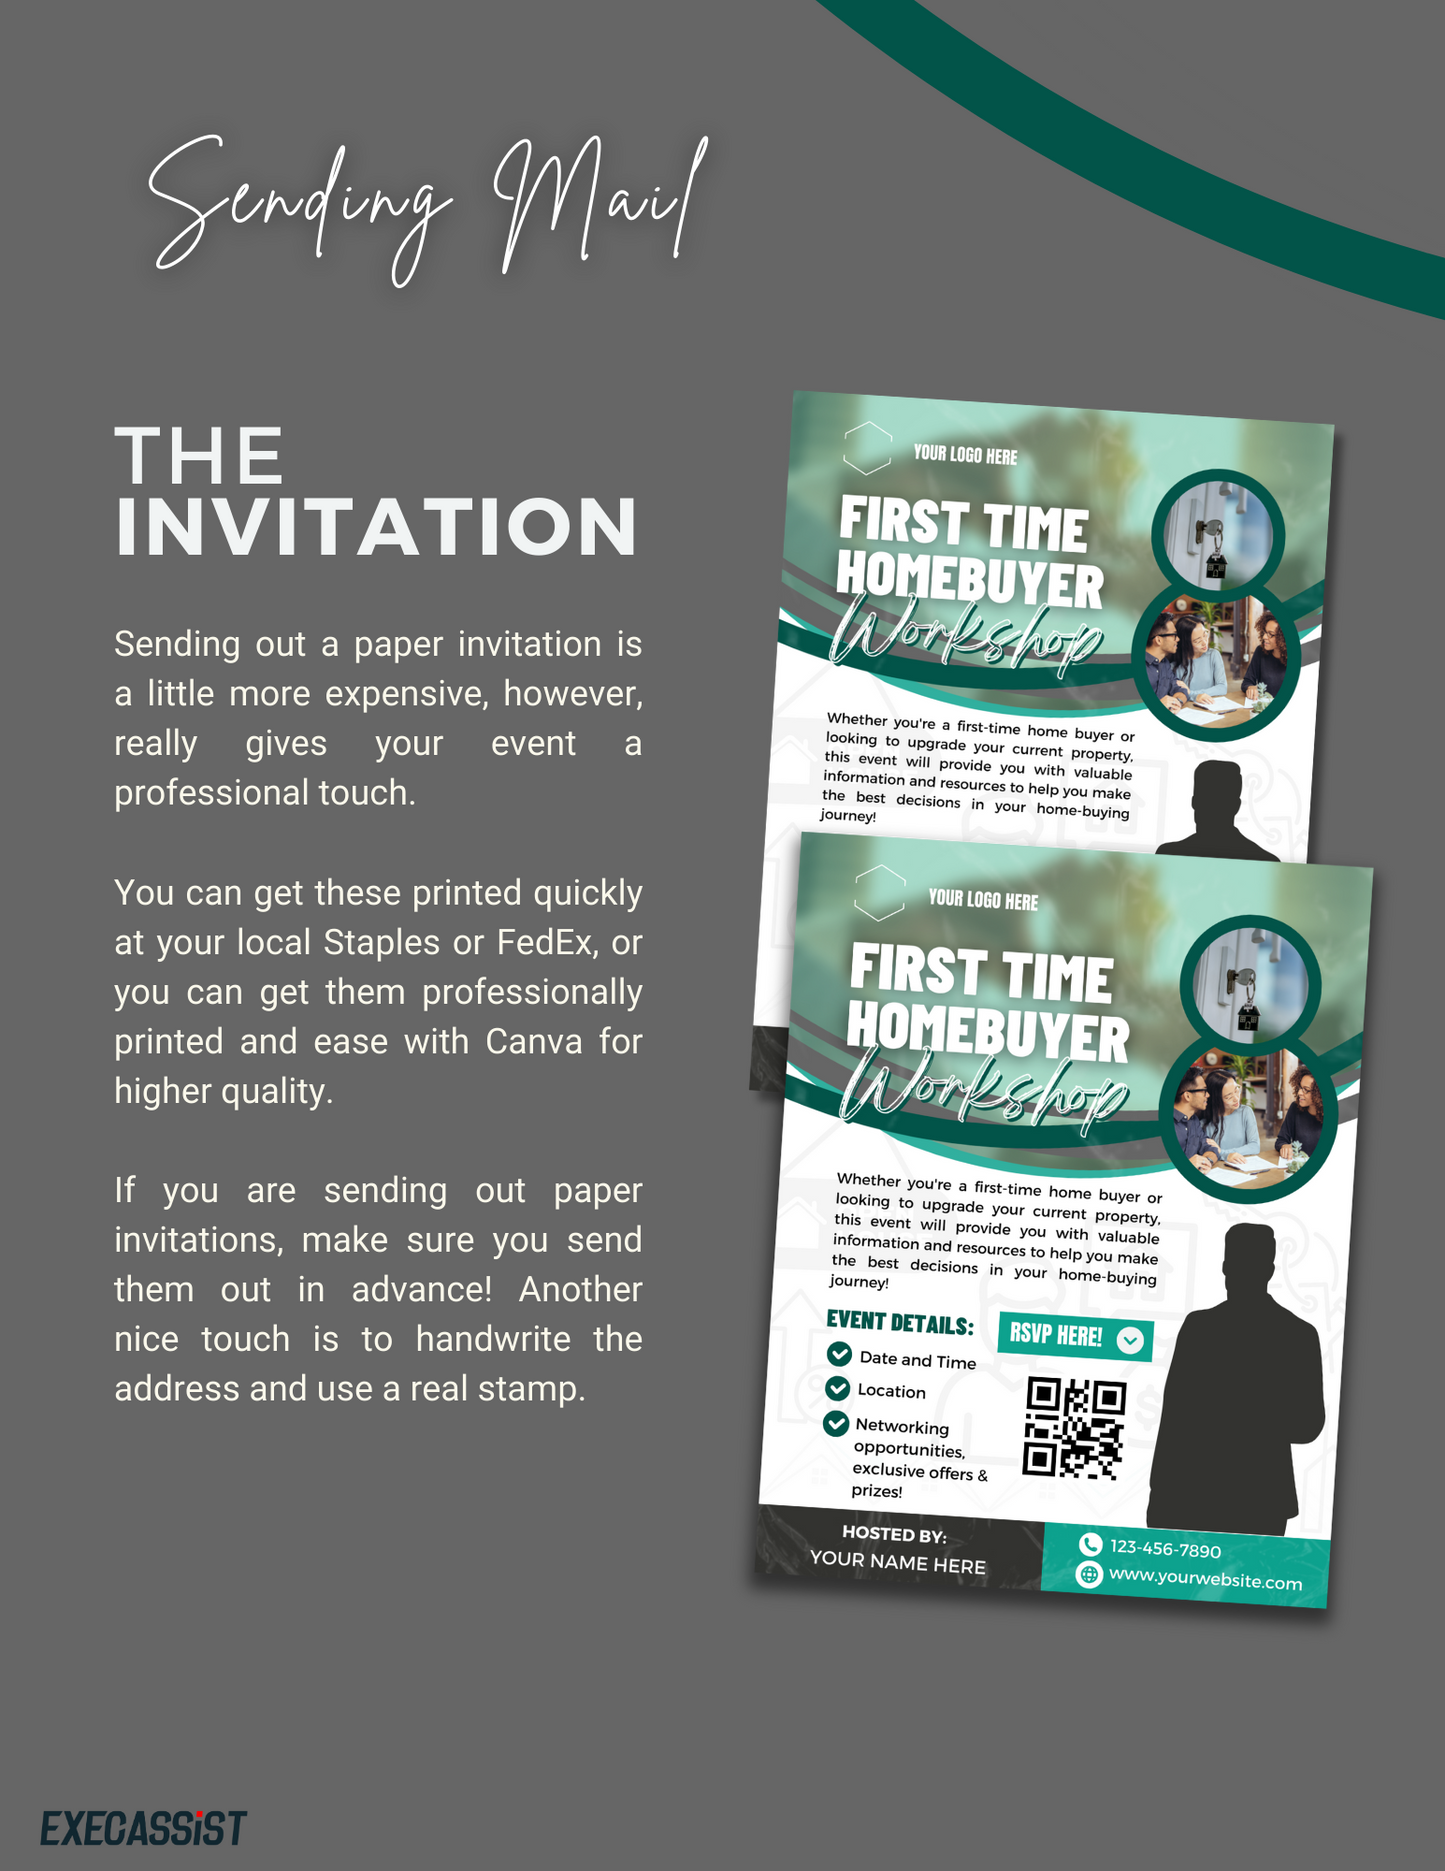 First Time Homebuyer - Event Guide